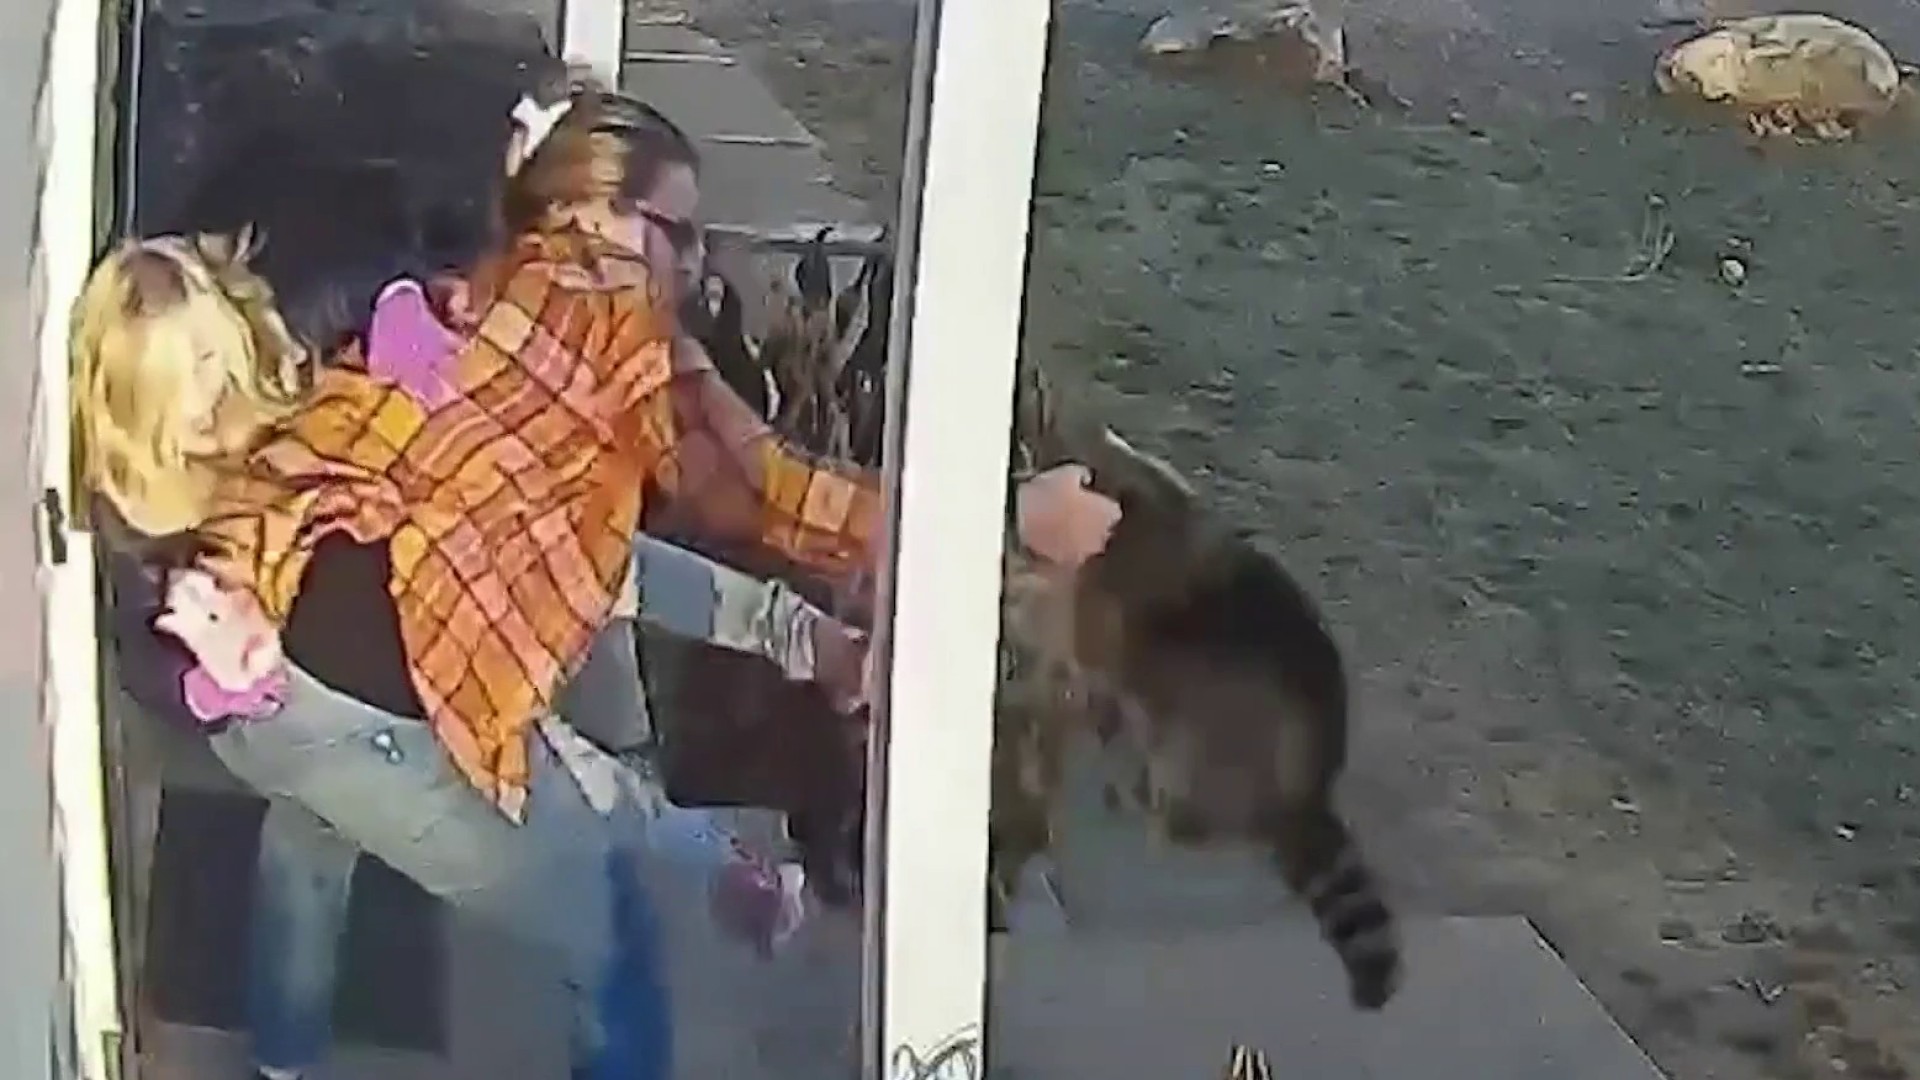 Wild animal attacks on two young girls caught on camera